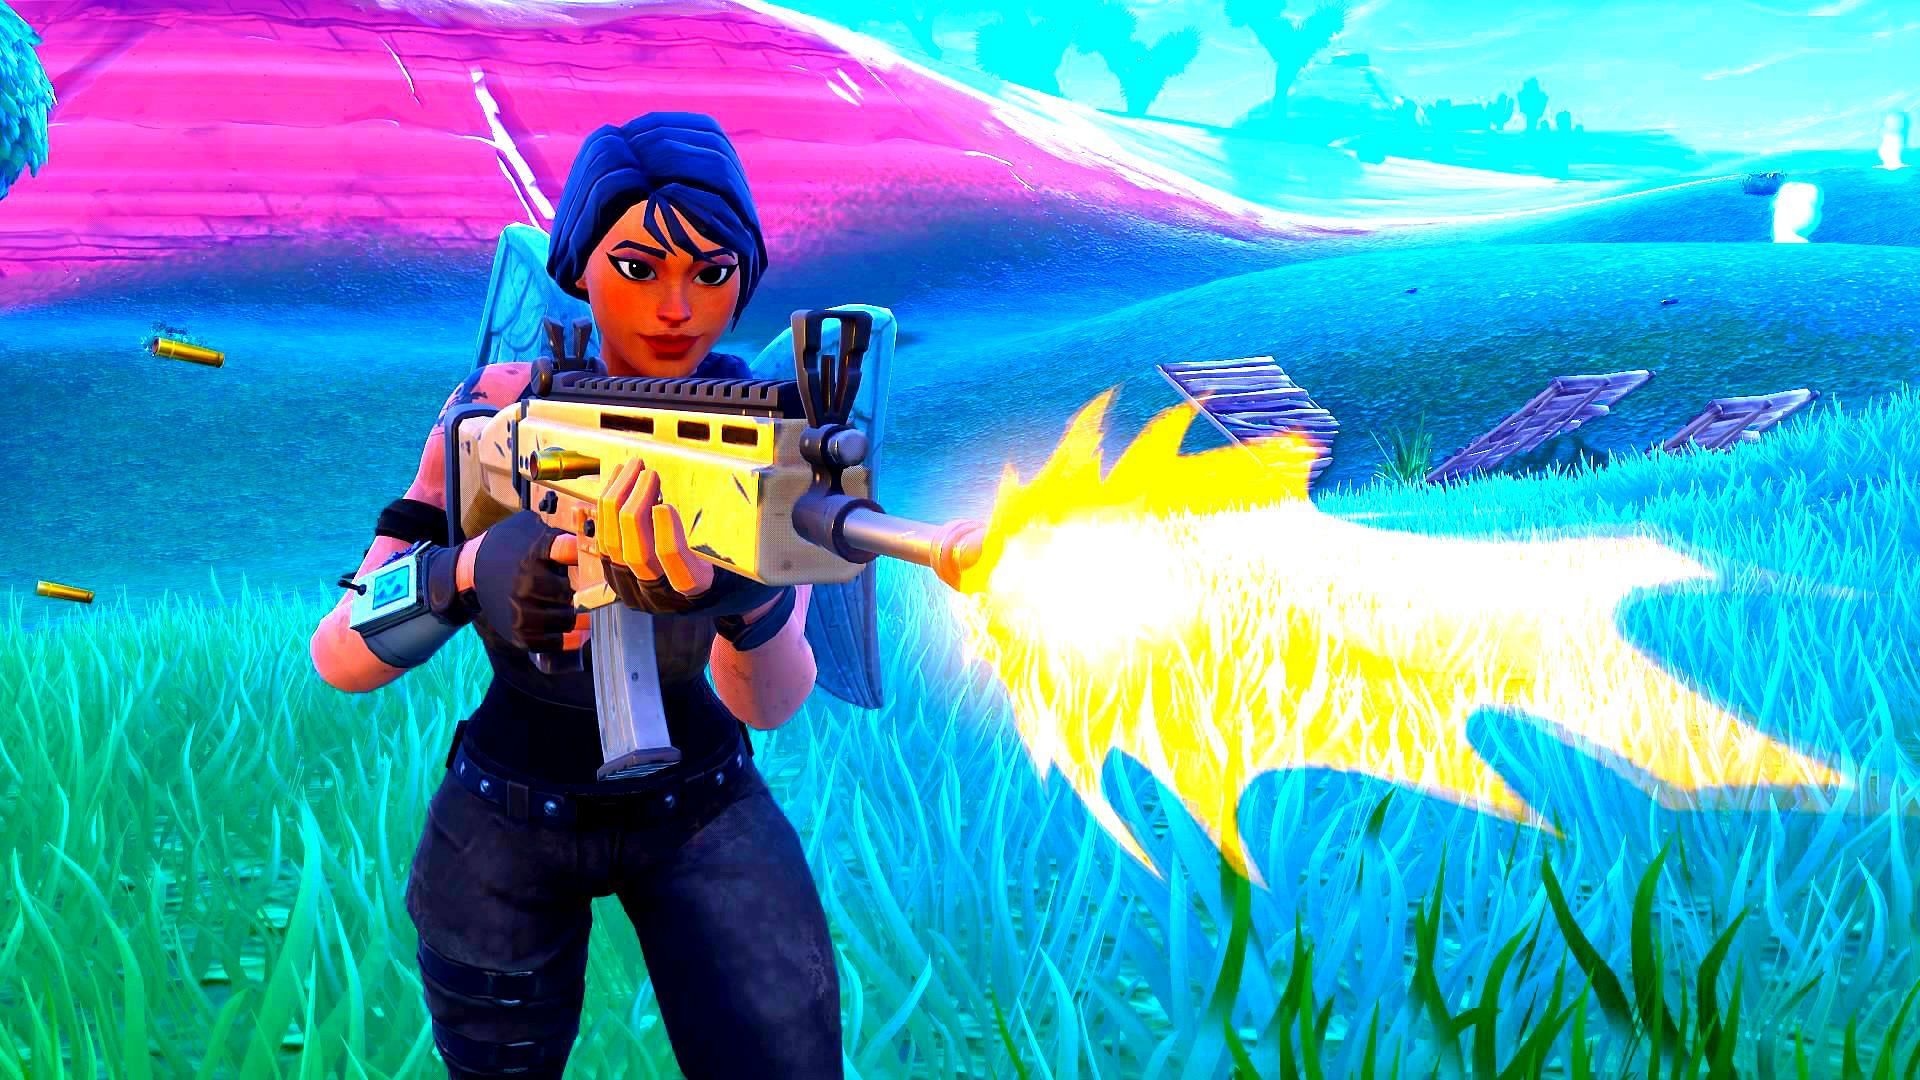 Mowing down an enemy with the spray and pray tactic is taking over Fortnite (Image via Epic Games)